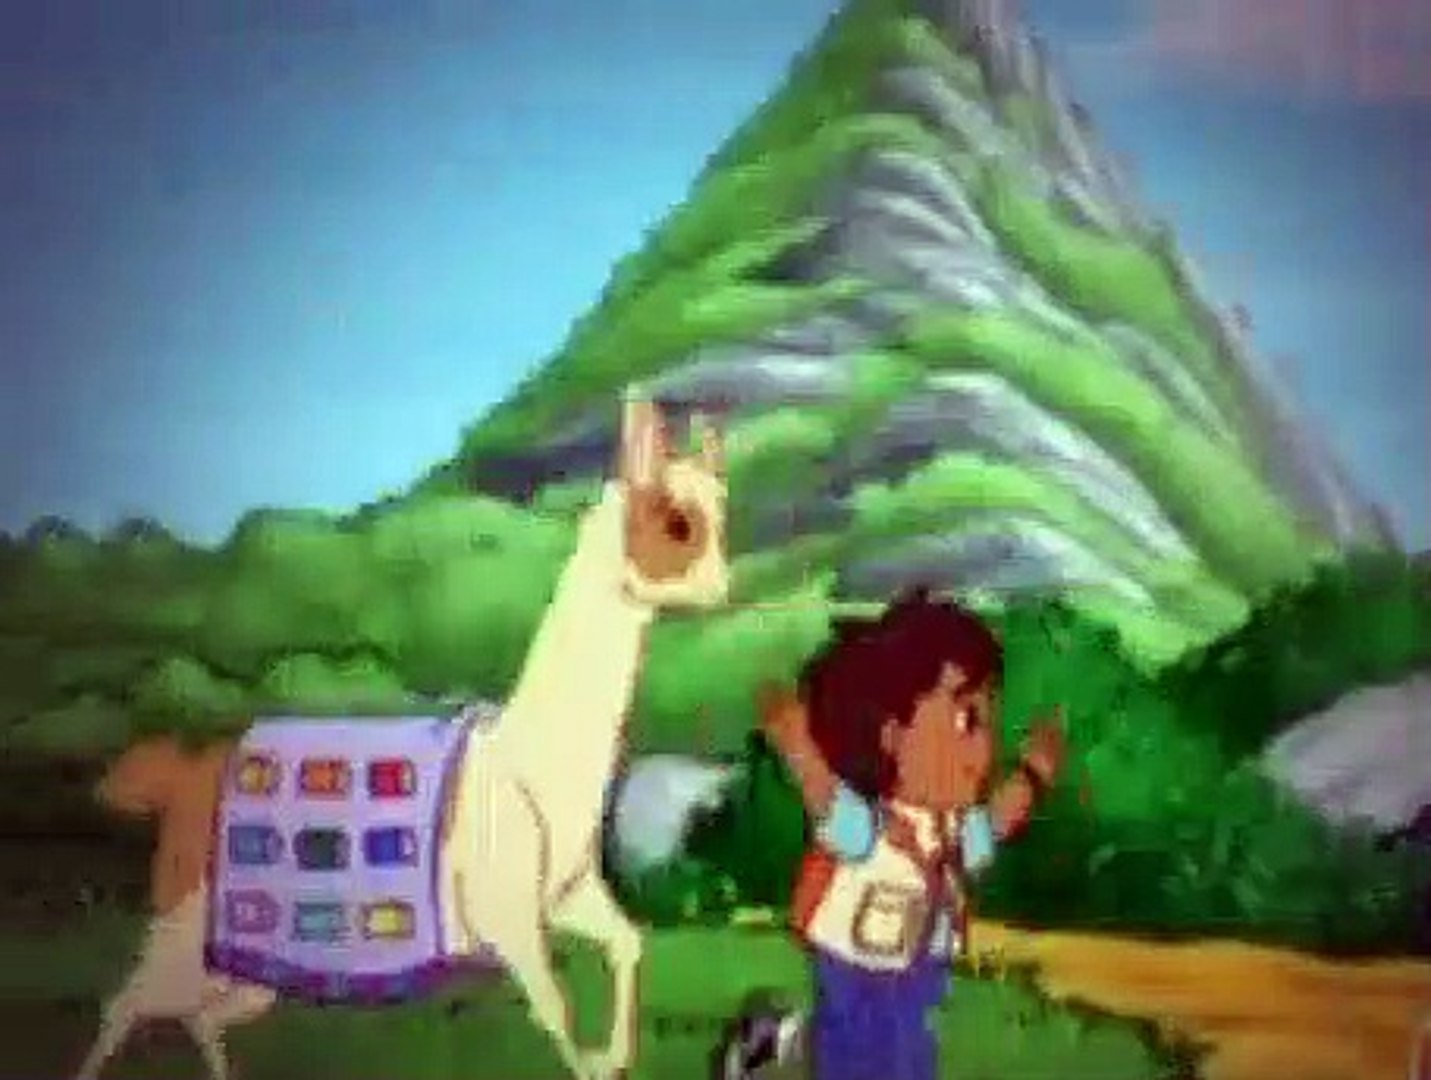 go- diego go s01e14 linda the librarian - video Dailymotion